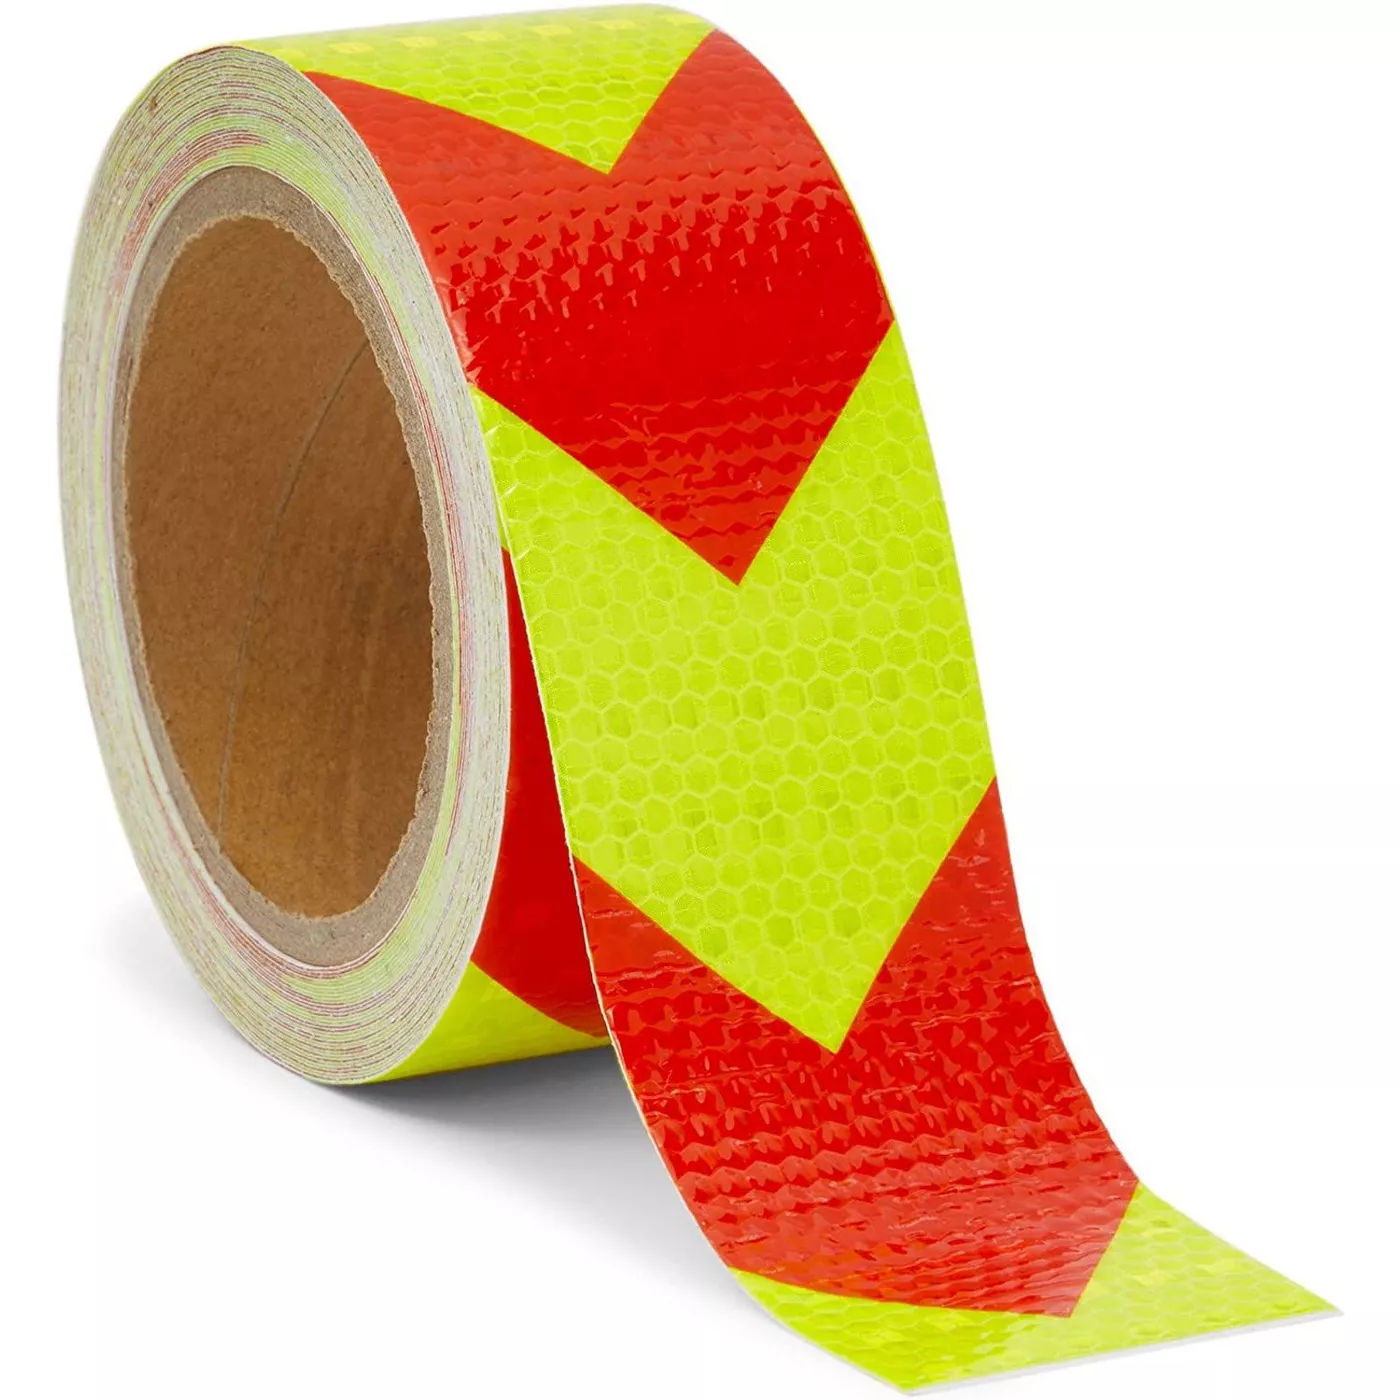 10cmx90cm Safety Arrow Reflective Stickers for Truck Safety Marking